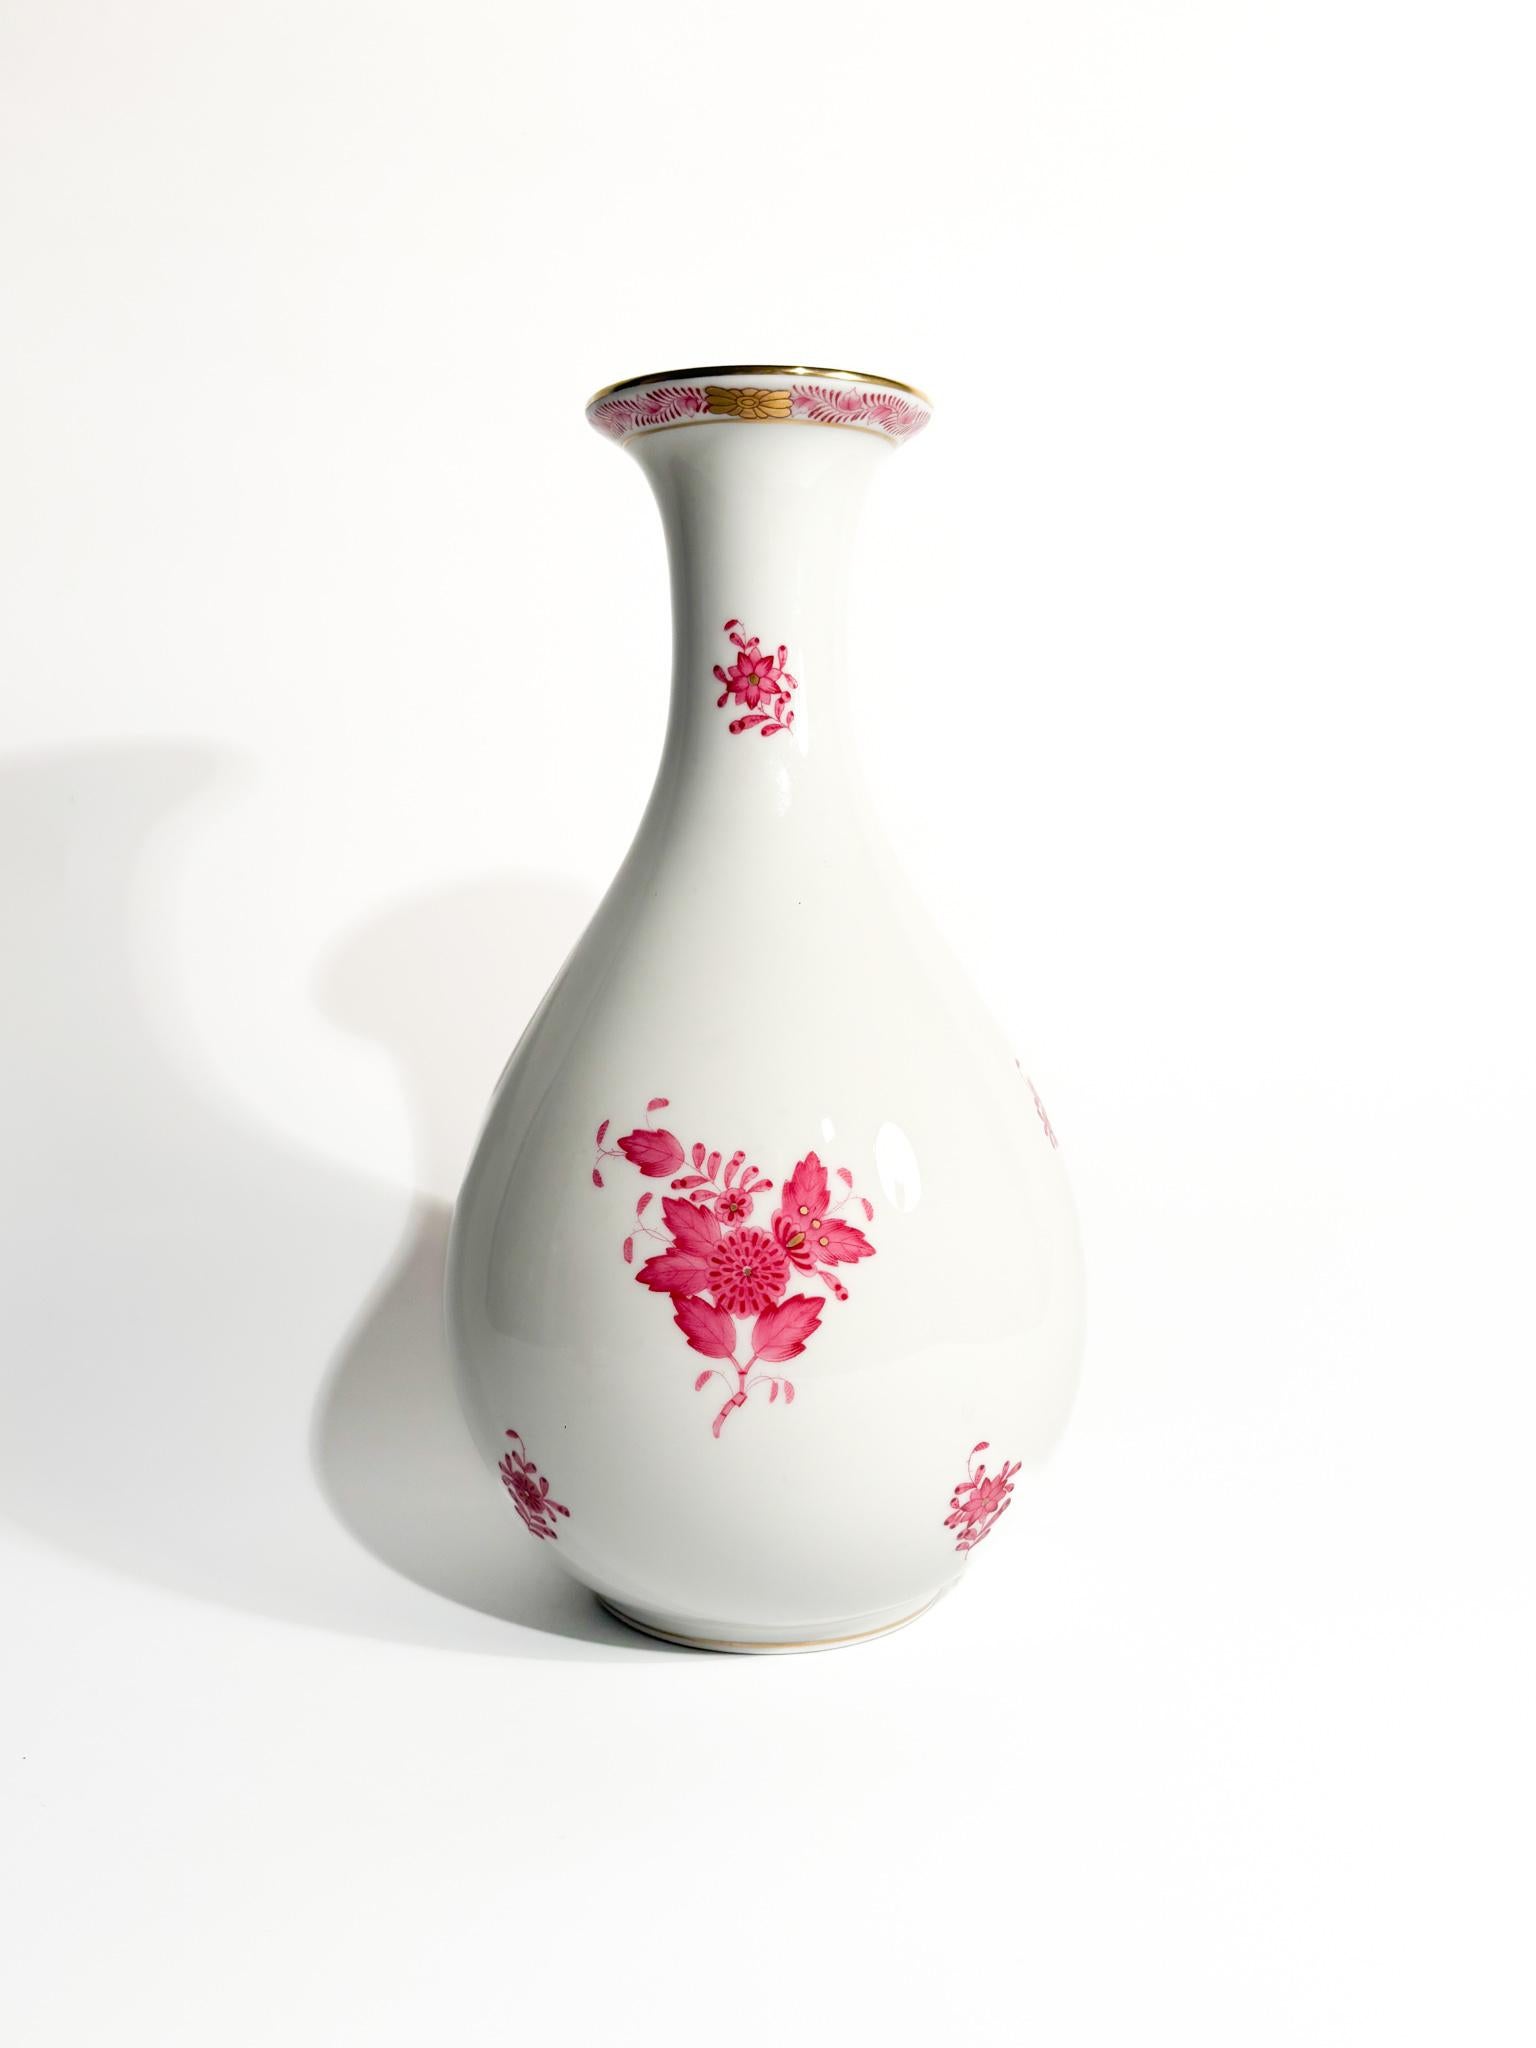 Herend porcelain vase, Apponyi Pink collections, hand painted and made in the 1950s

Ø cm 13 h cm 24

Herend porcelain is among the most prestigious and sought after in the world. Made in Hungary since 1826, Herend is known for its exceptional